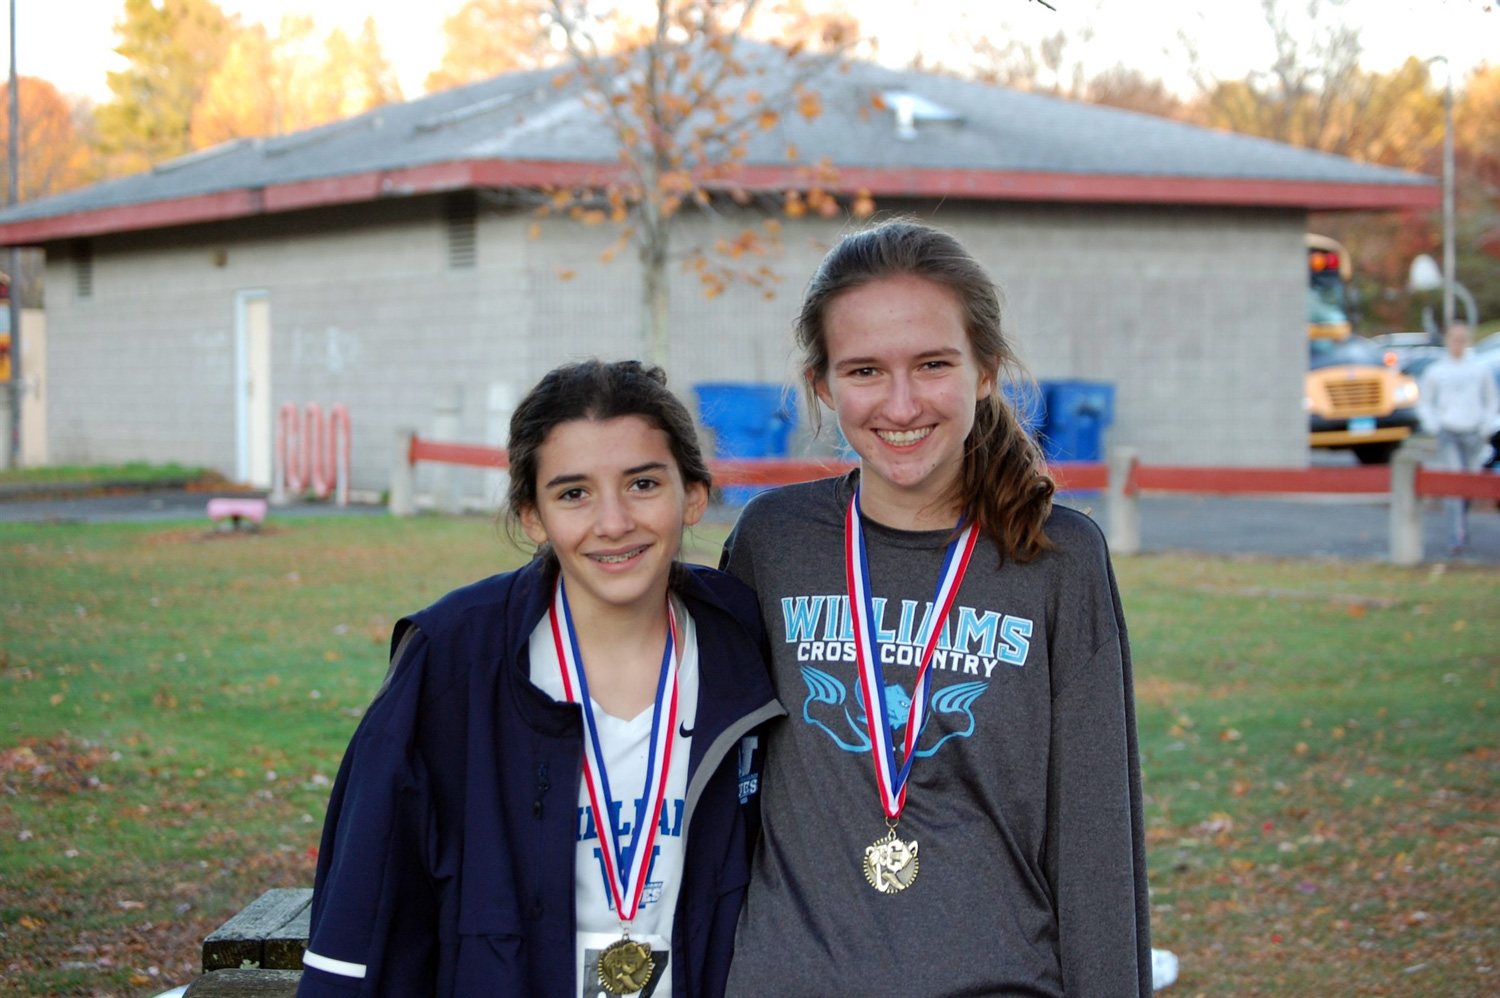 two cross country runners wearing medals around necks